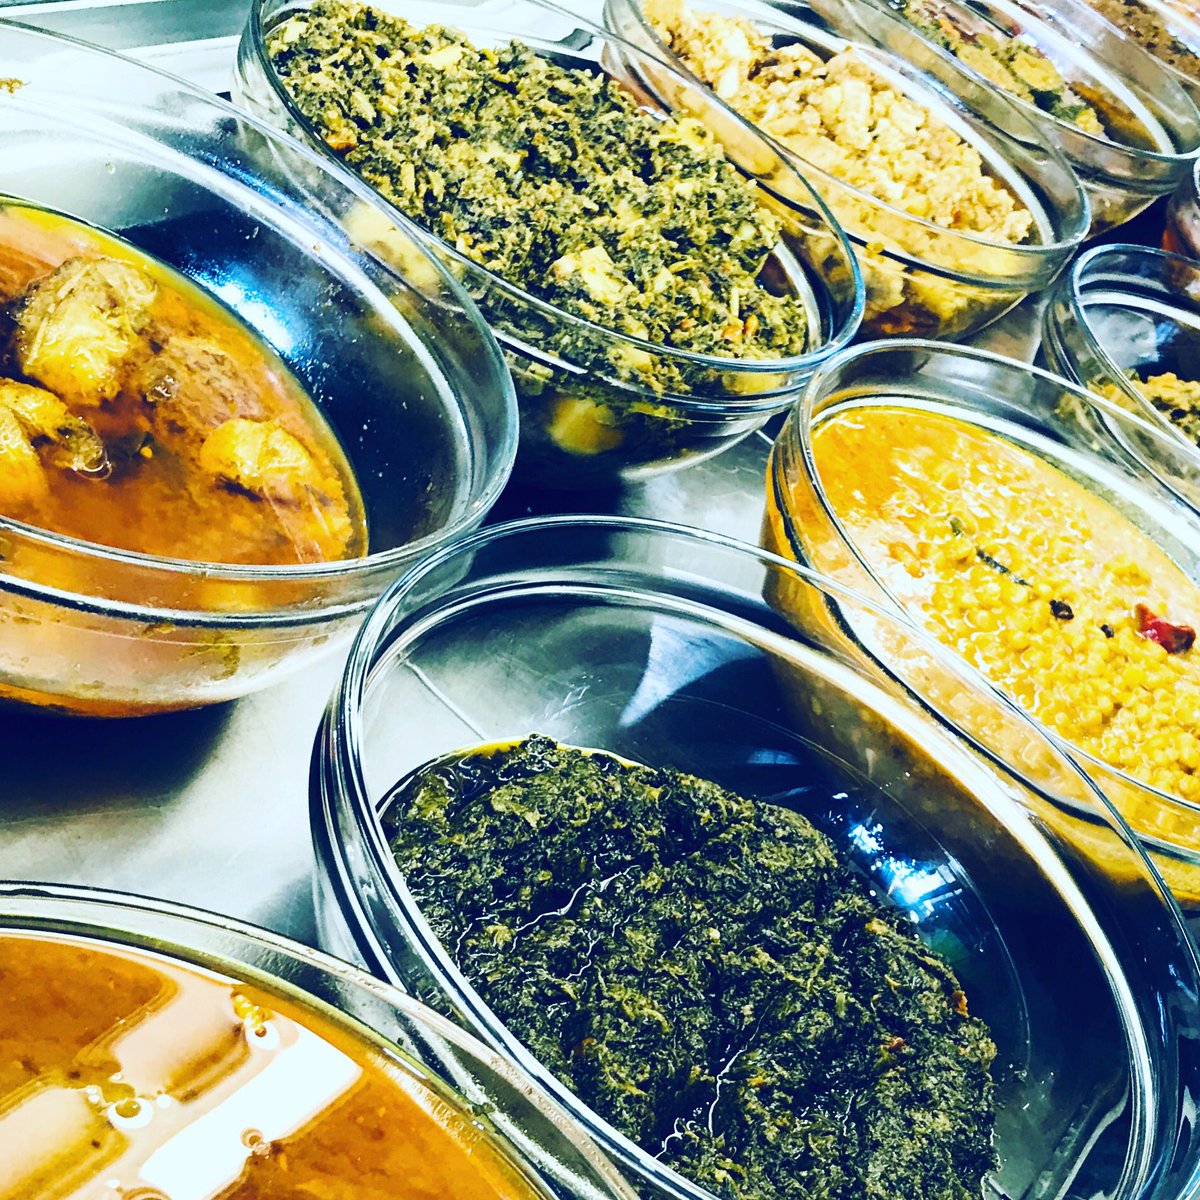 Our selection of vegan curries is growing day by day! Why not pop in and try one for yourself, all served with free rice! 

#tasteoflahore #worthing #curry #vegan #keepitlocalworthing